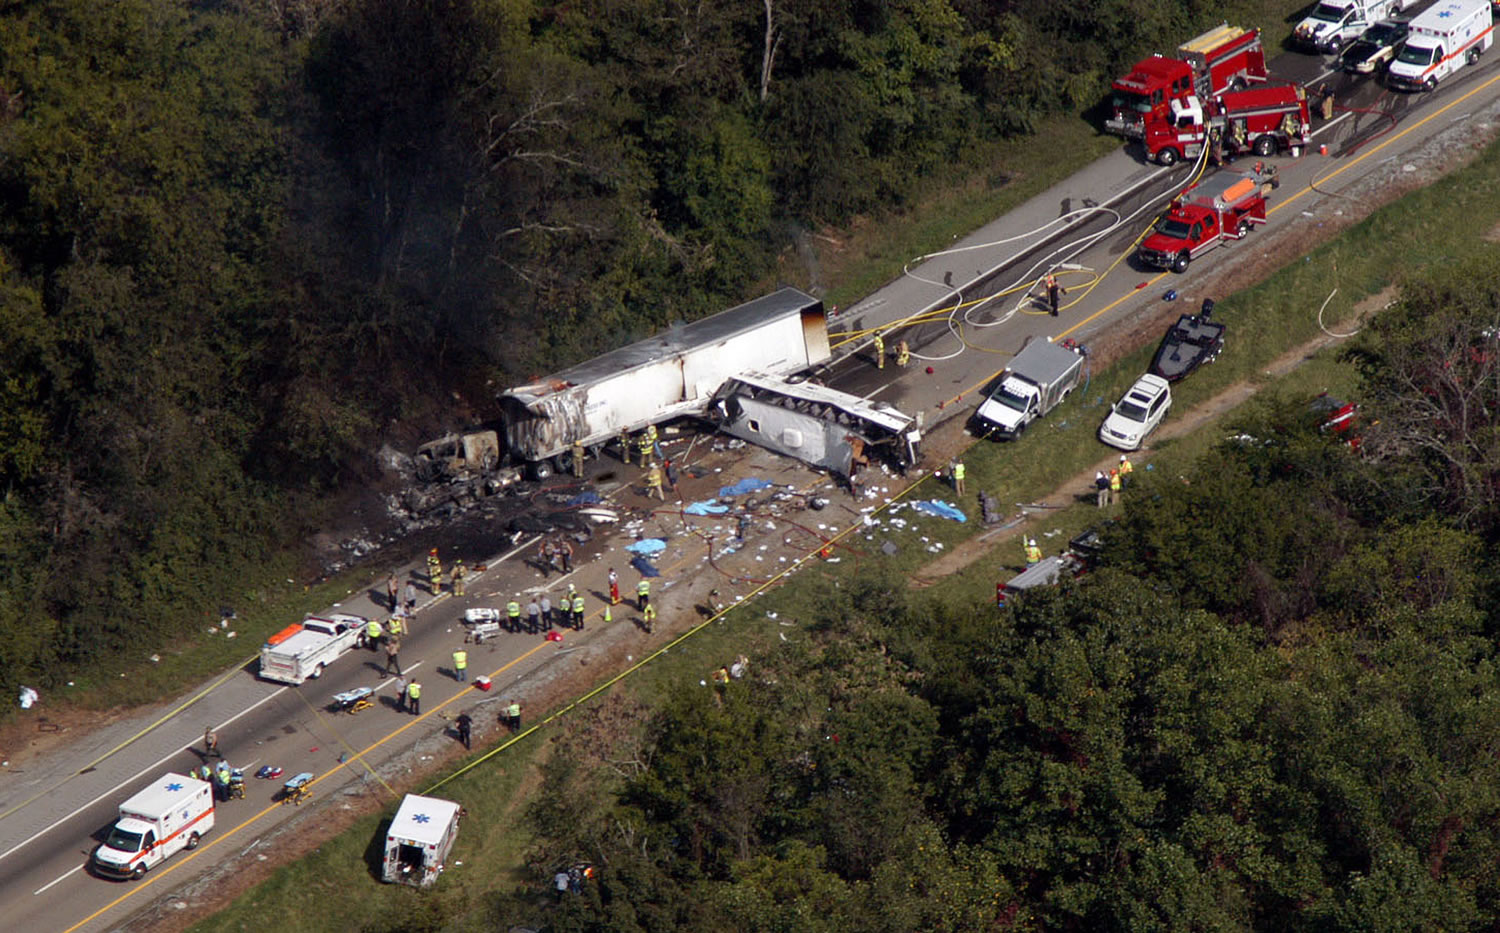 Emergency workers respond to a crash involving a church bus and a tractor-trailer near Dandridge, Tenn., on Wednesday.